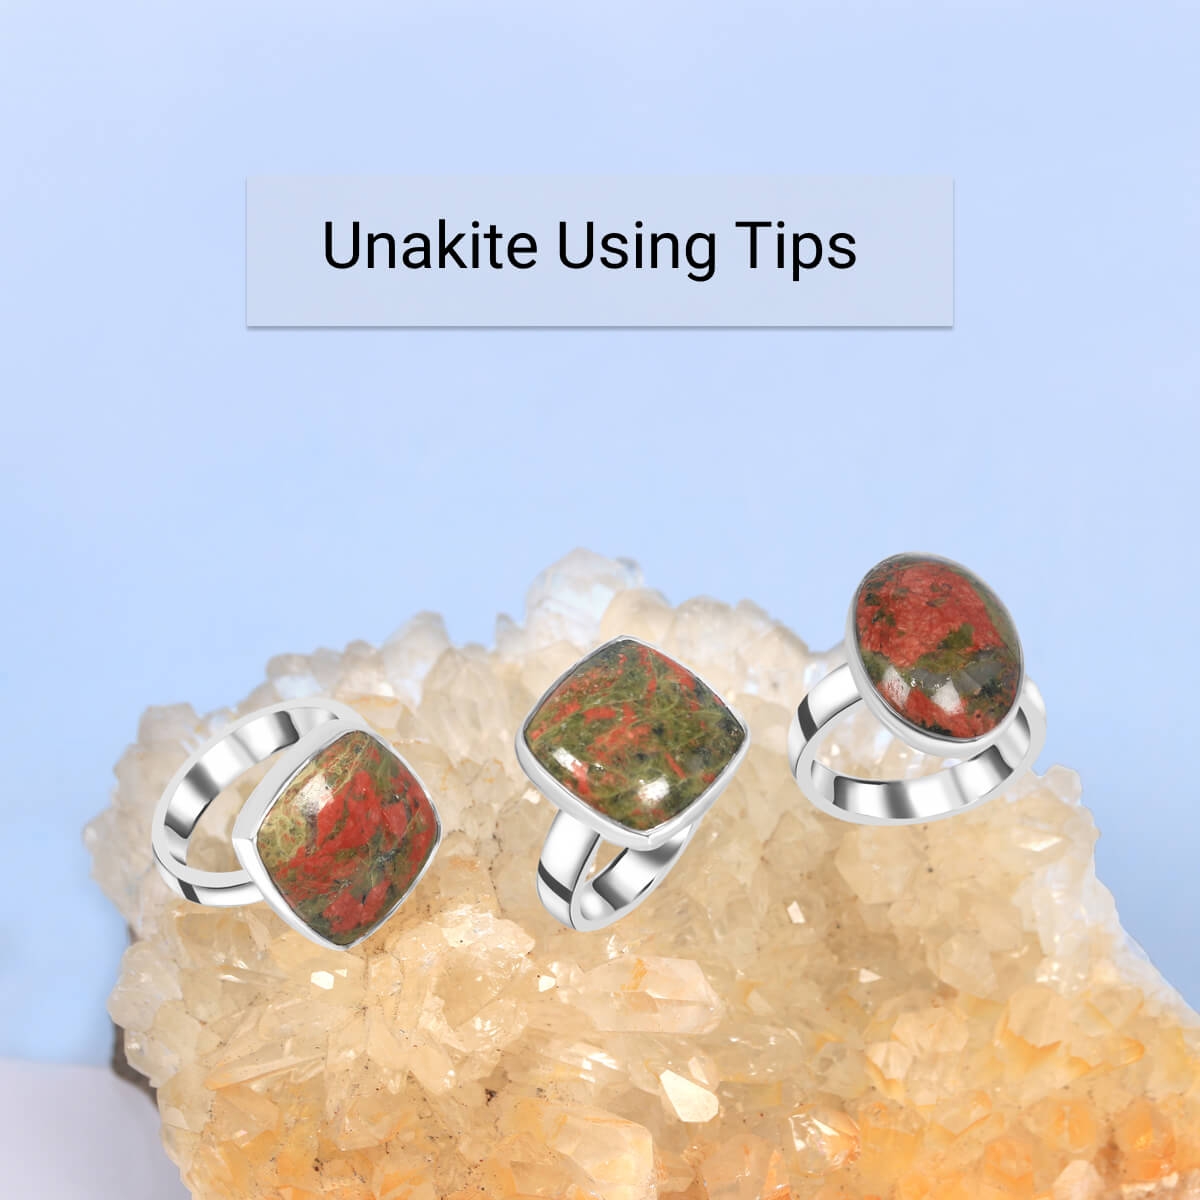 How To Use Unakite?